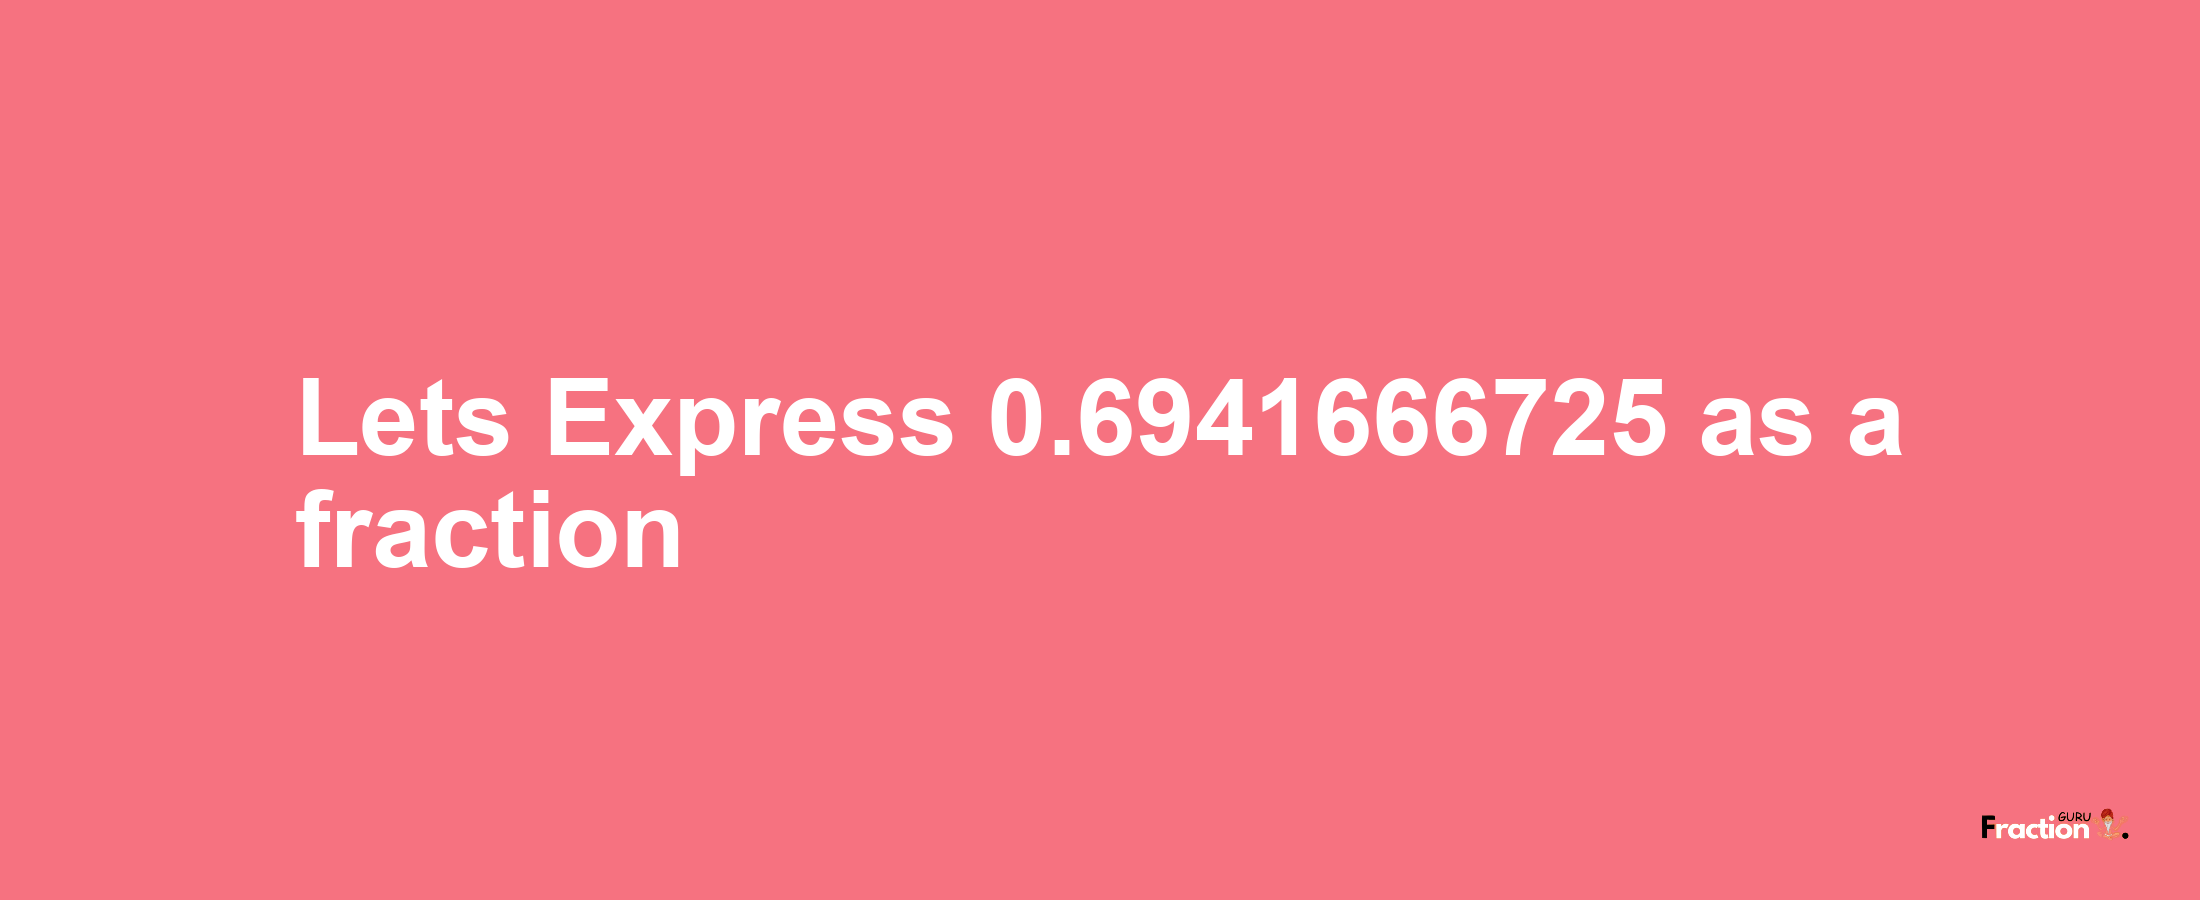 Lets Express 0.6941666725 as afraction